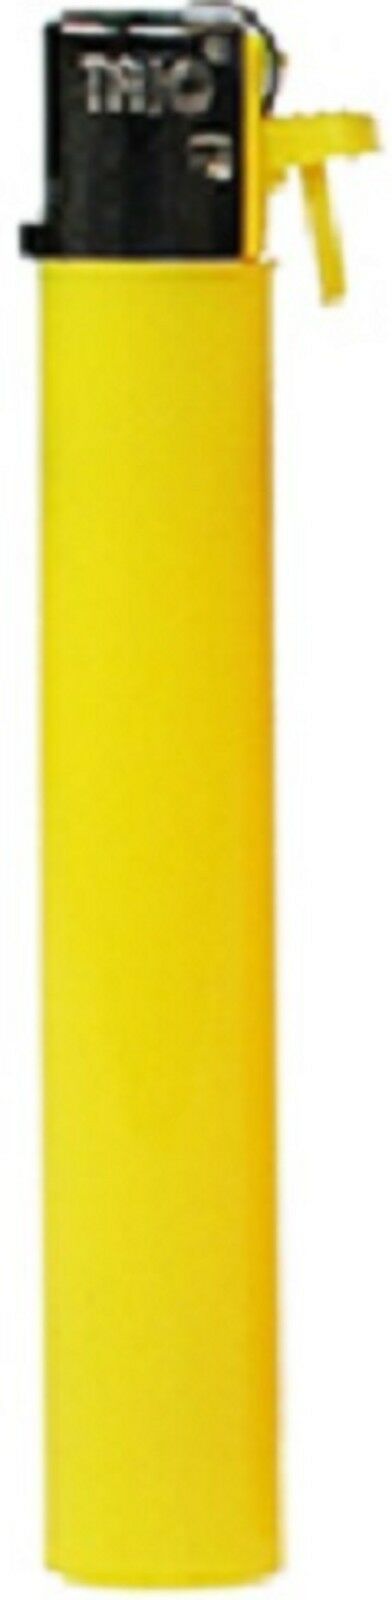 slimline gas refillable normal flame solid colour lighter yellow